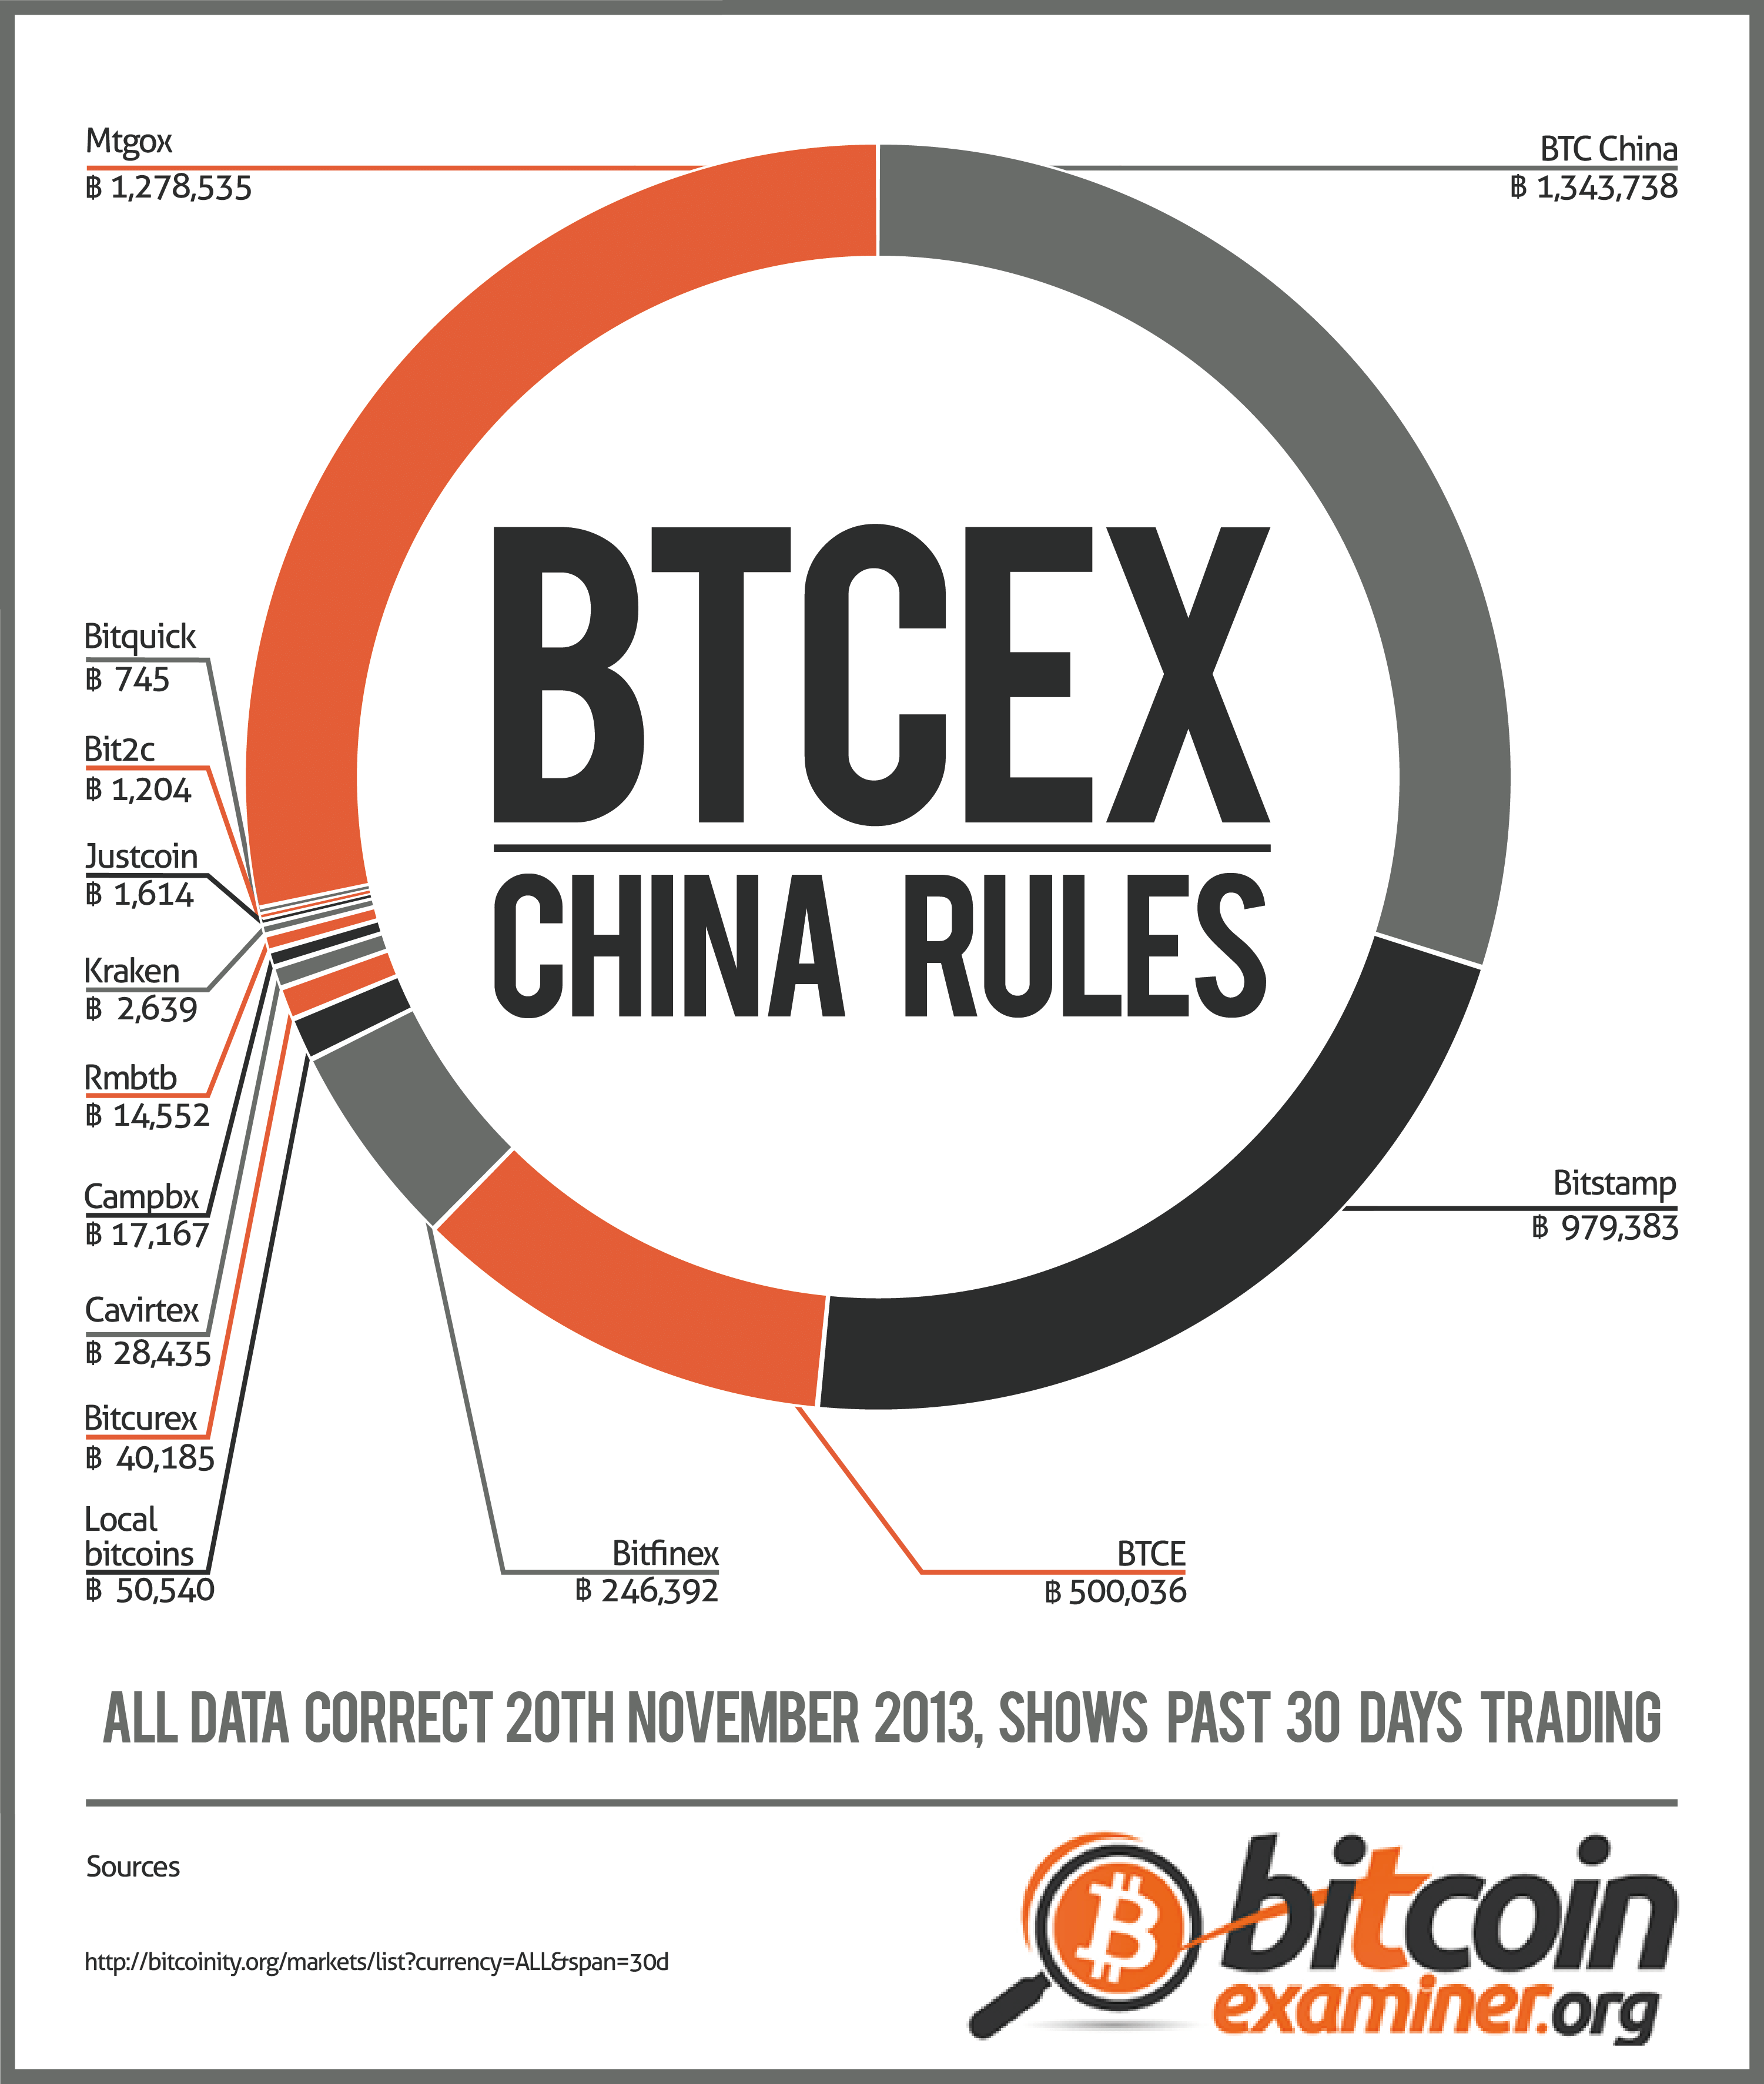 Why is China ruling the Bitcoin trading ecosystem